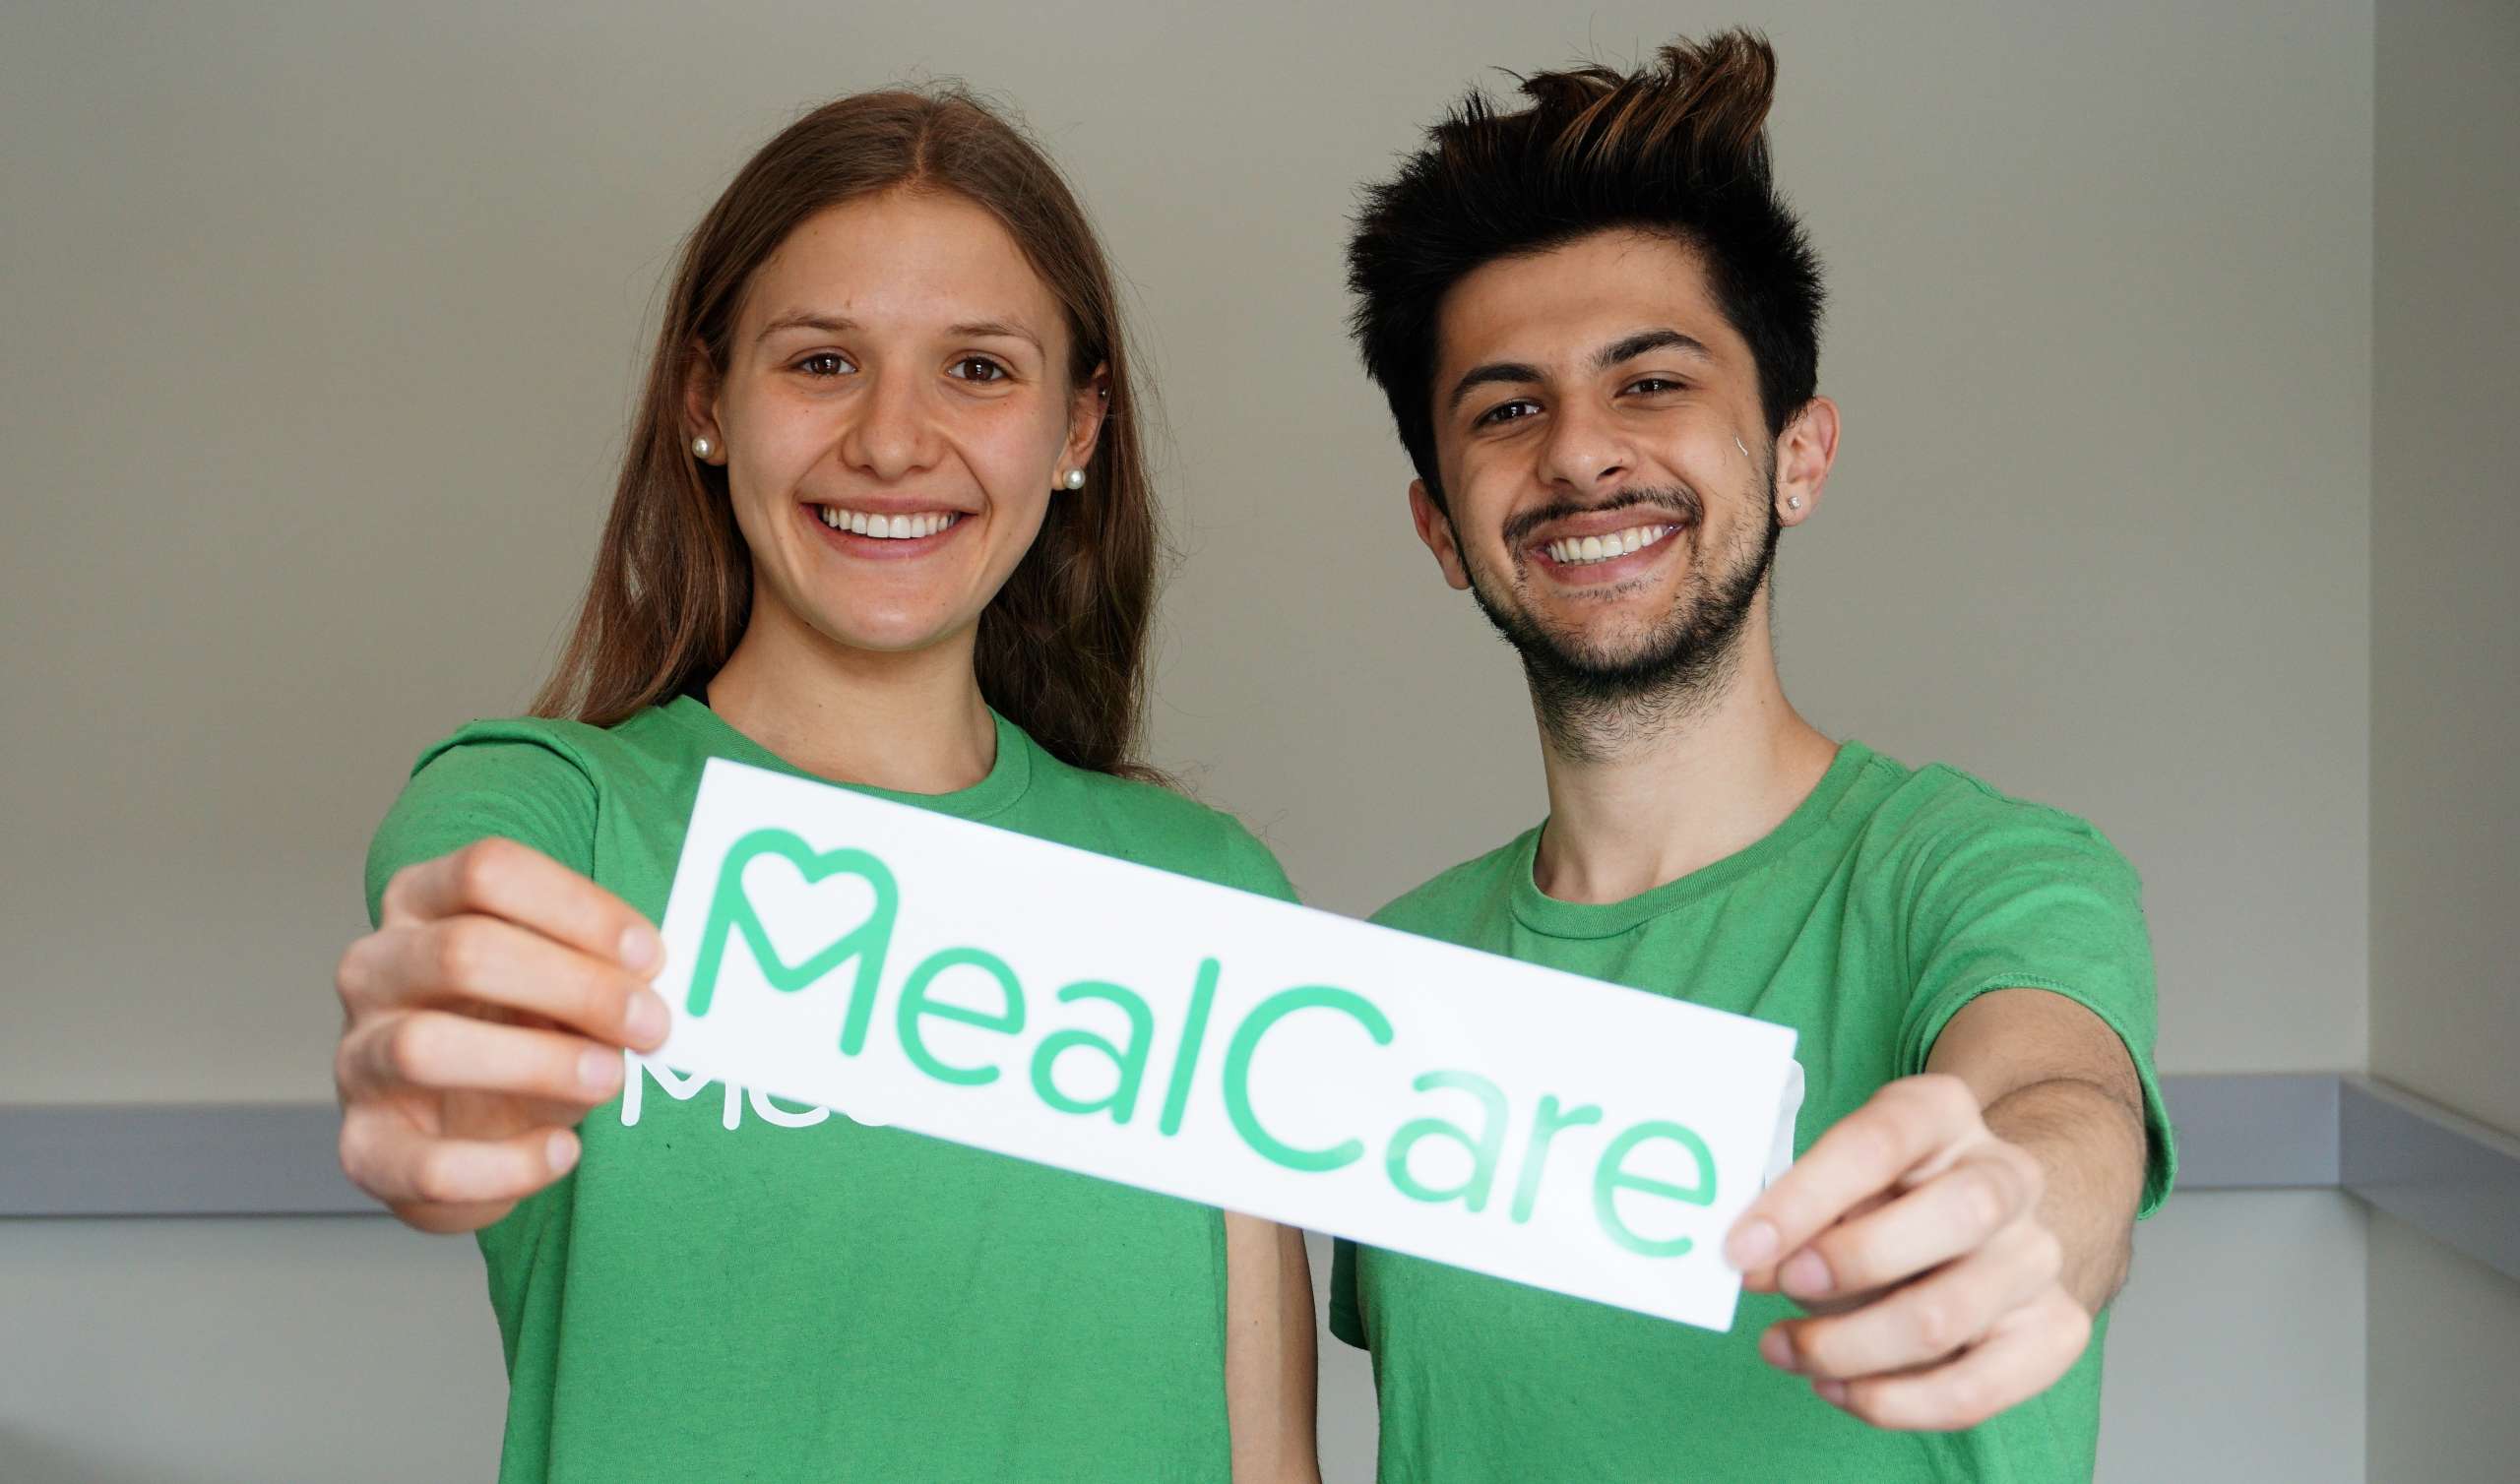 Student-Run MealCare Project Donates Food to Local Charities